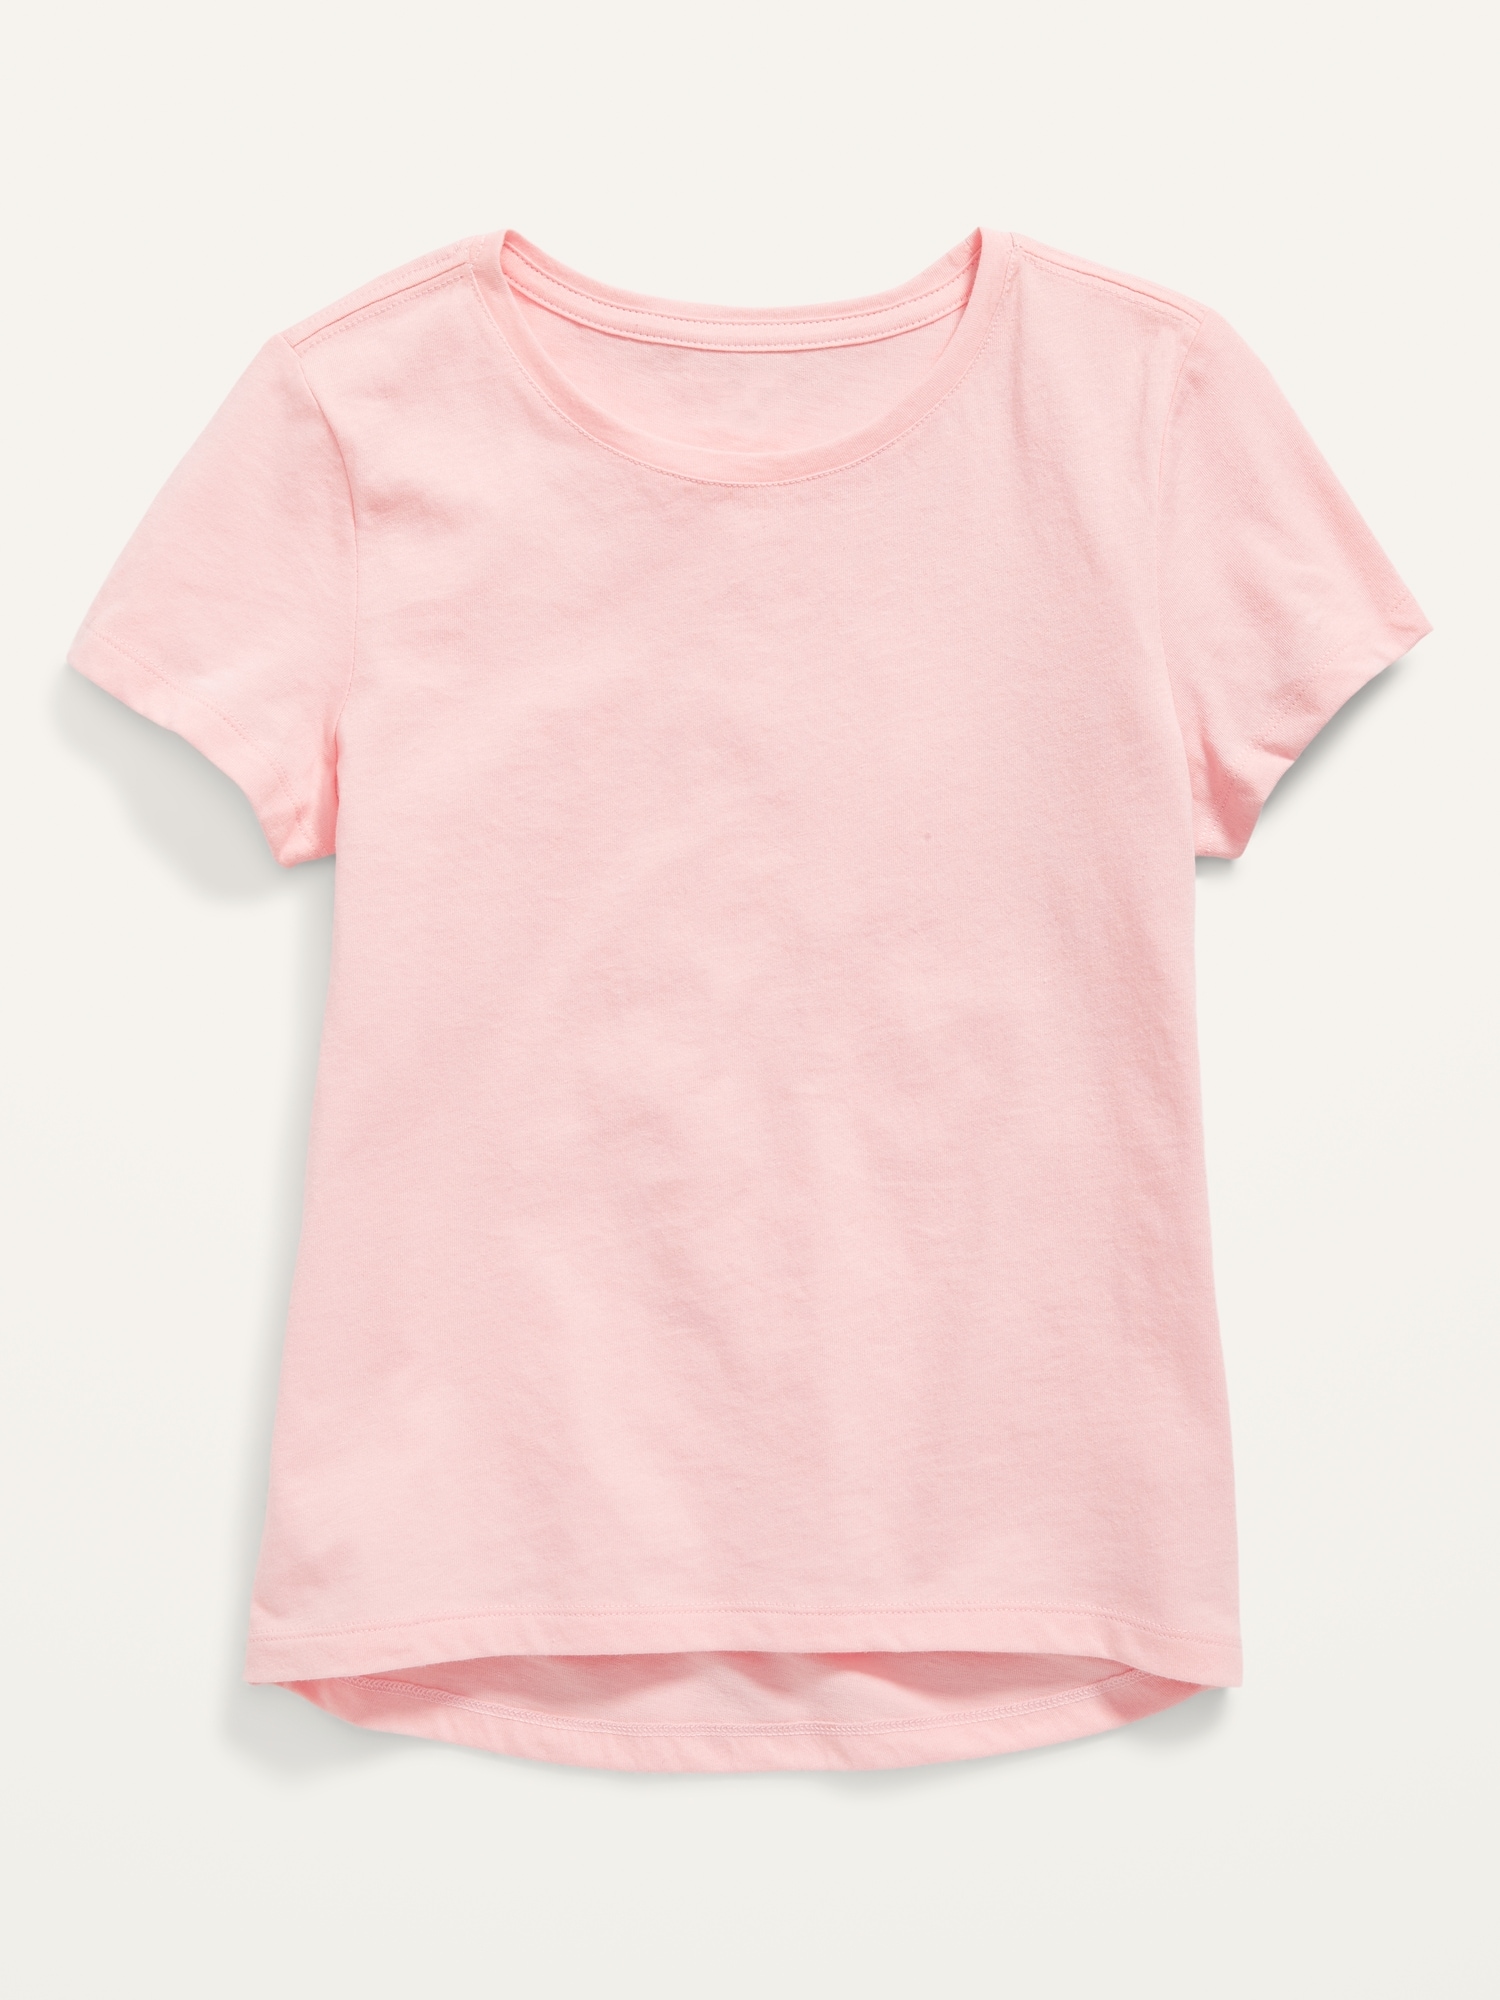 Old Navy Softest Short-Sleeve T-Shirt for Girls pink. 1